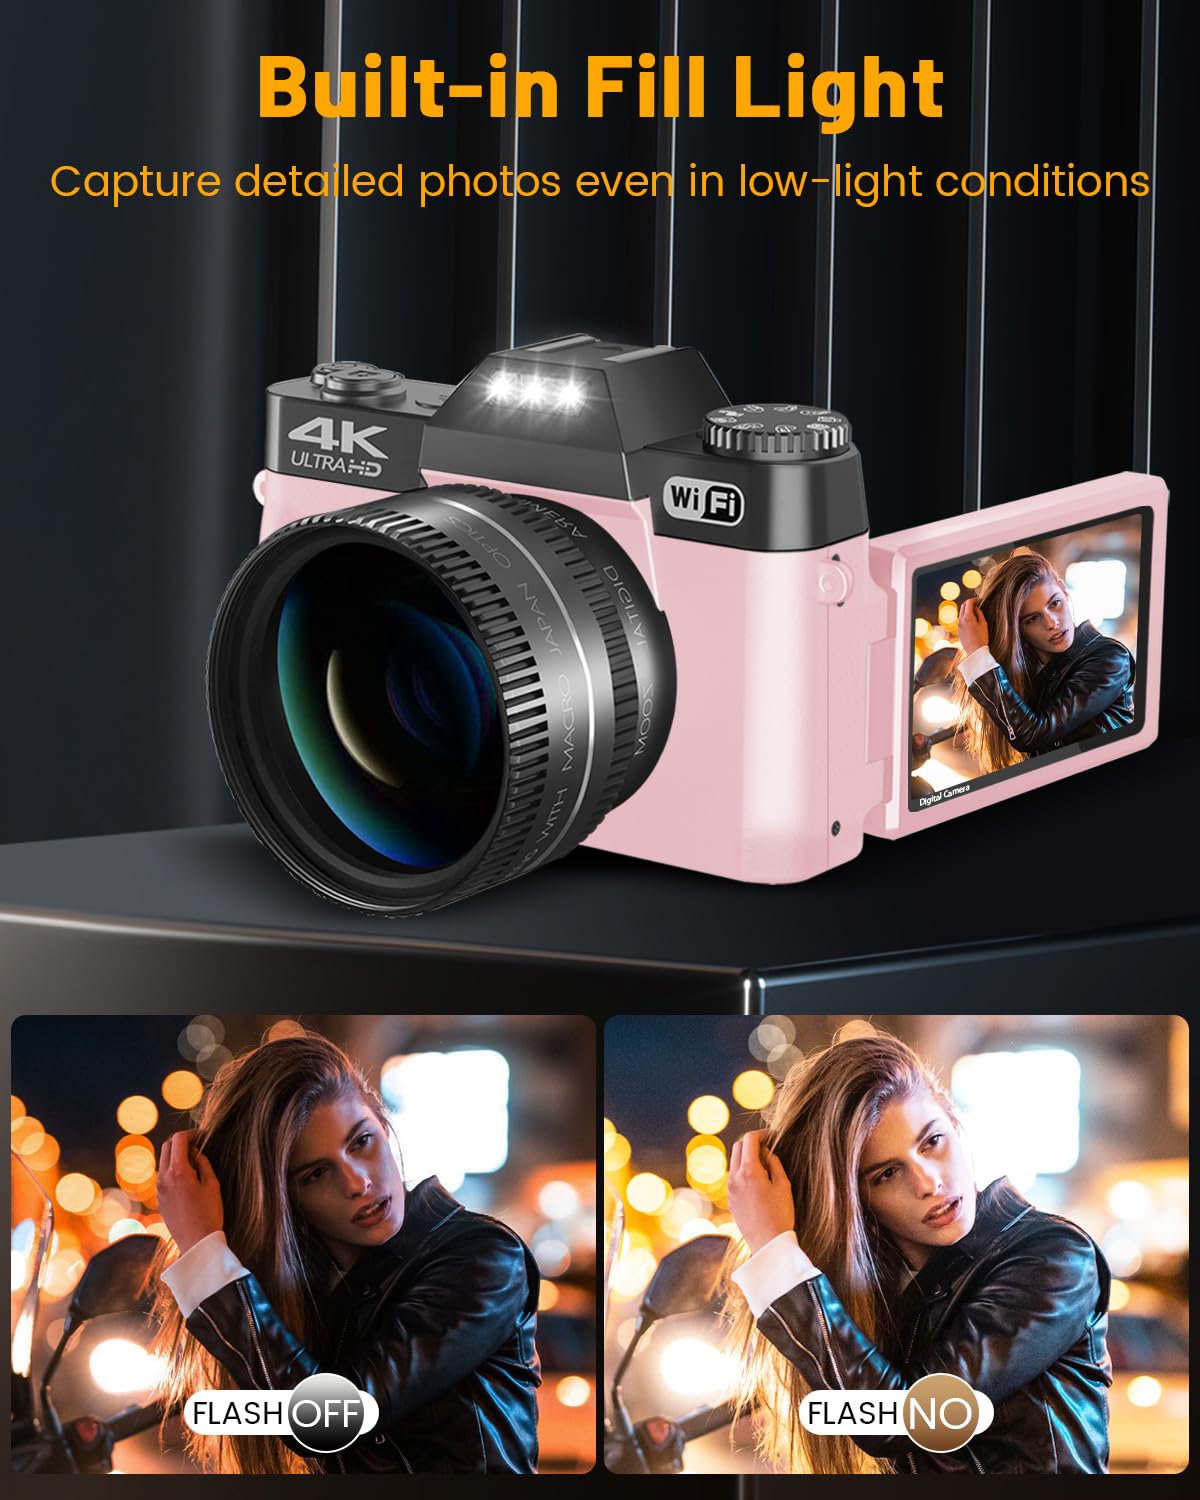 Digital Camera for Photograohy and Video VJIANGER 4K 48MP WiFi Vlogging Camera with 180° Flip Screen, 16X Digital Zoom, 52mm Wide Angle & Macro Lens, 2 Batteries and 32GB TF Card(W02-Pink32)